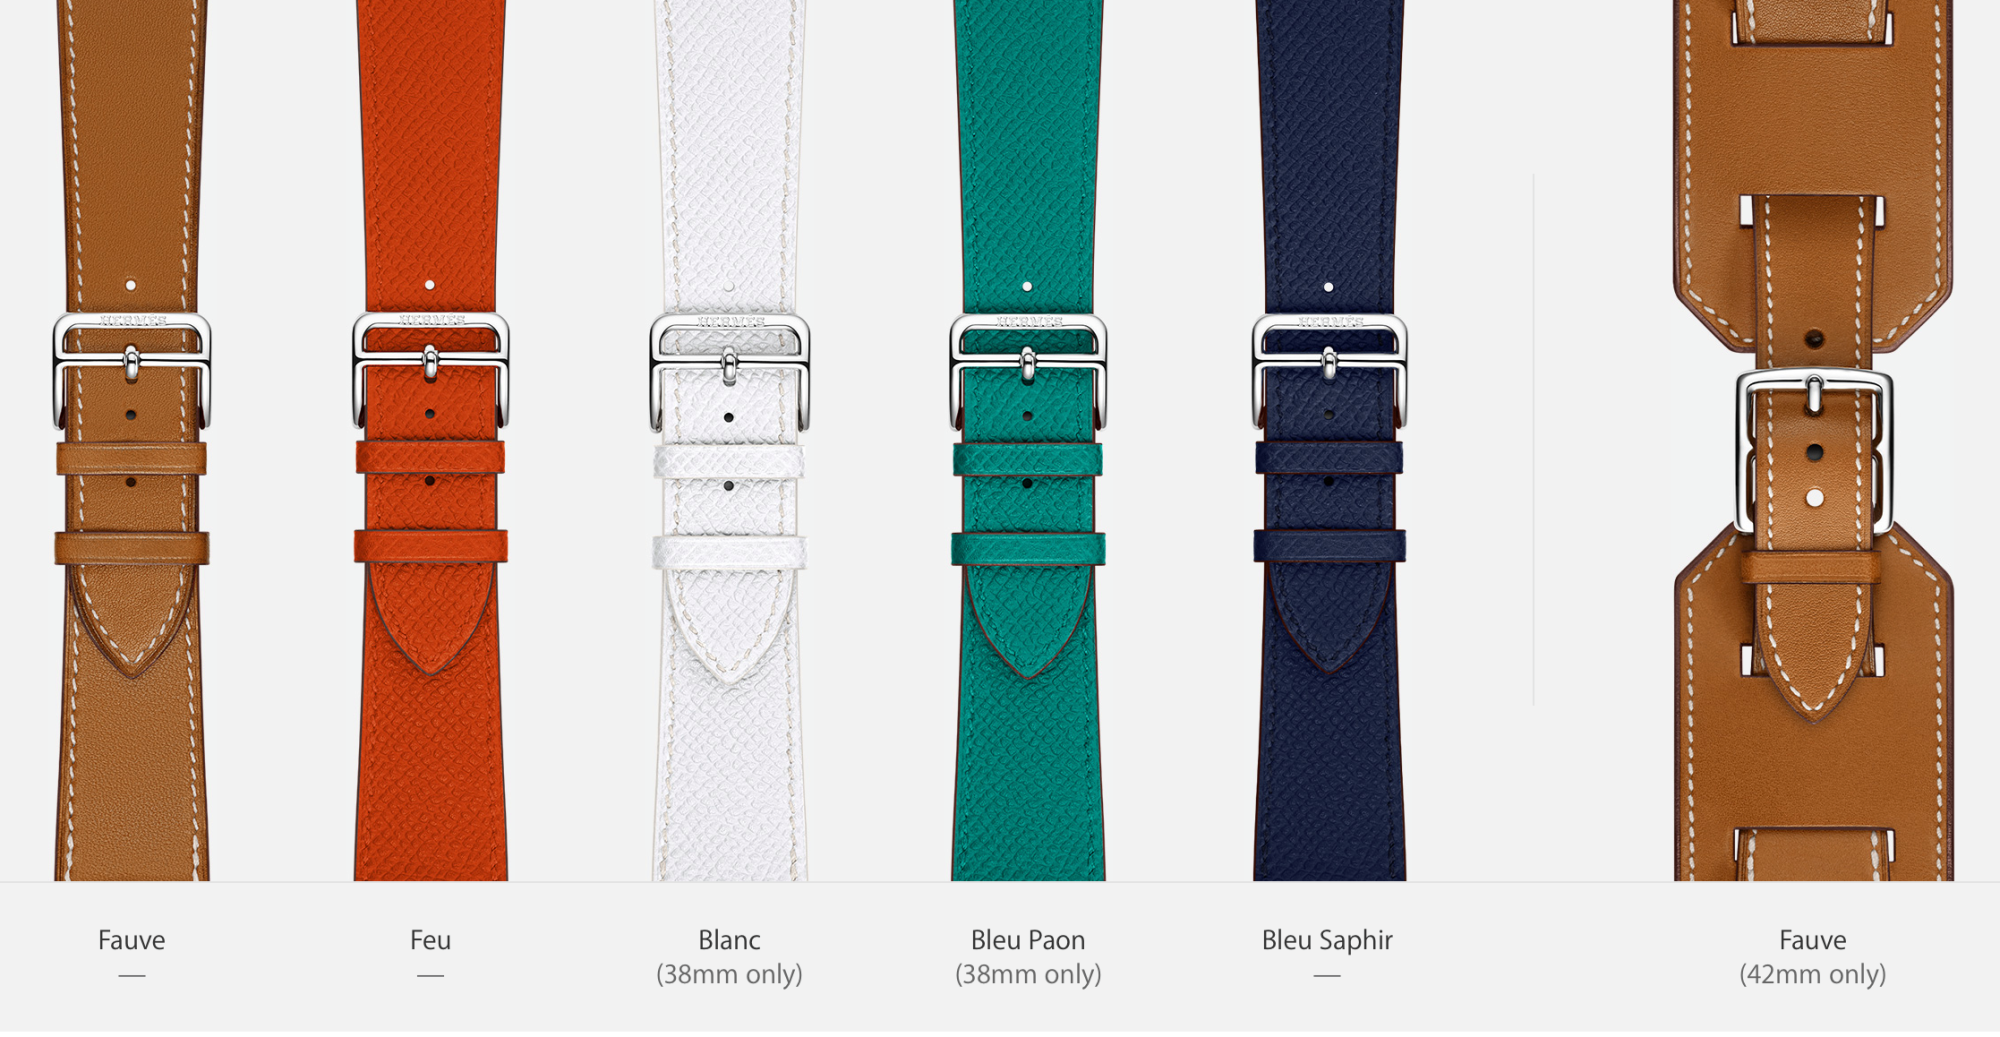 apple watch hermes strap only